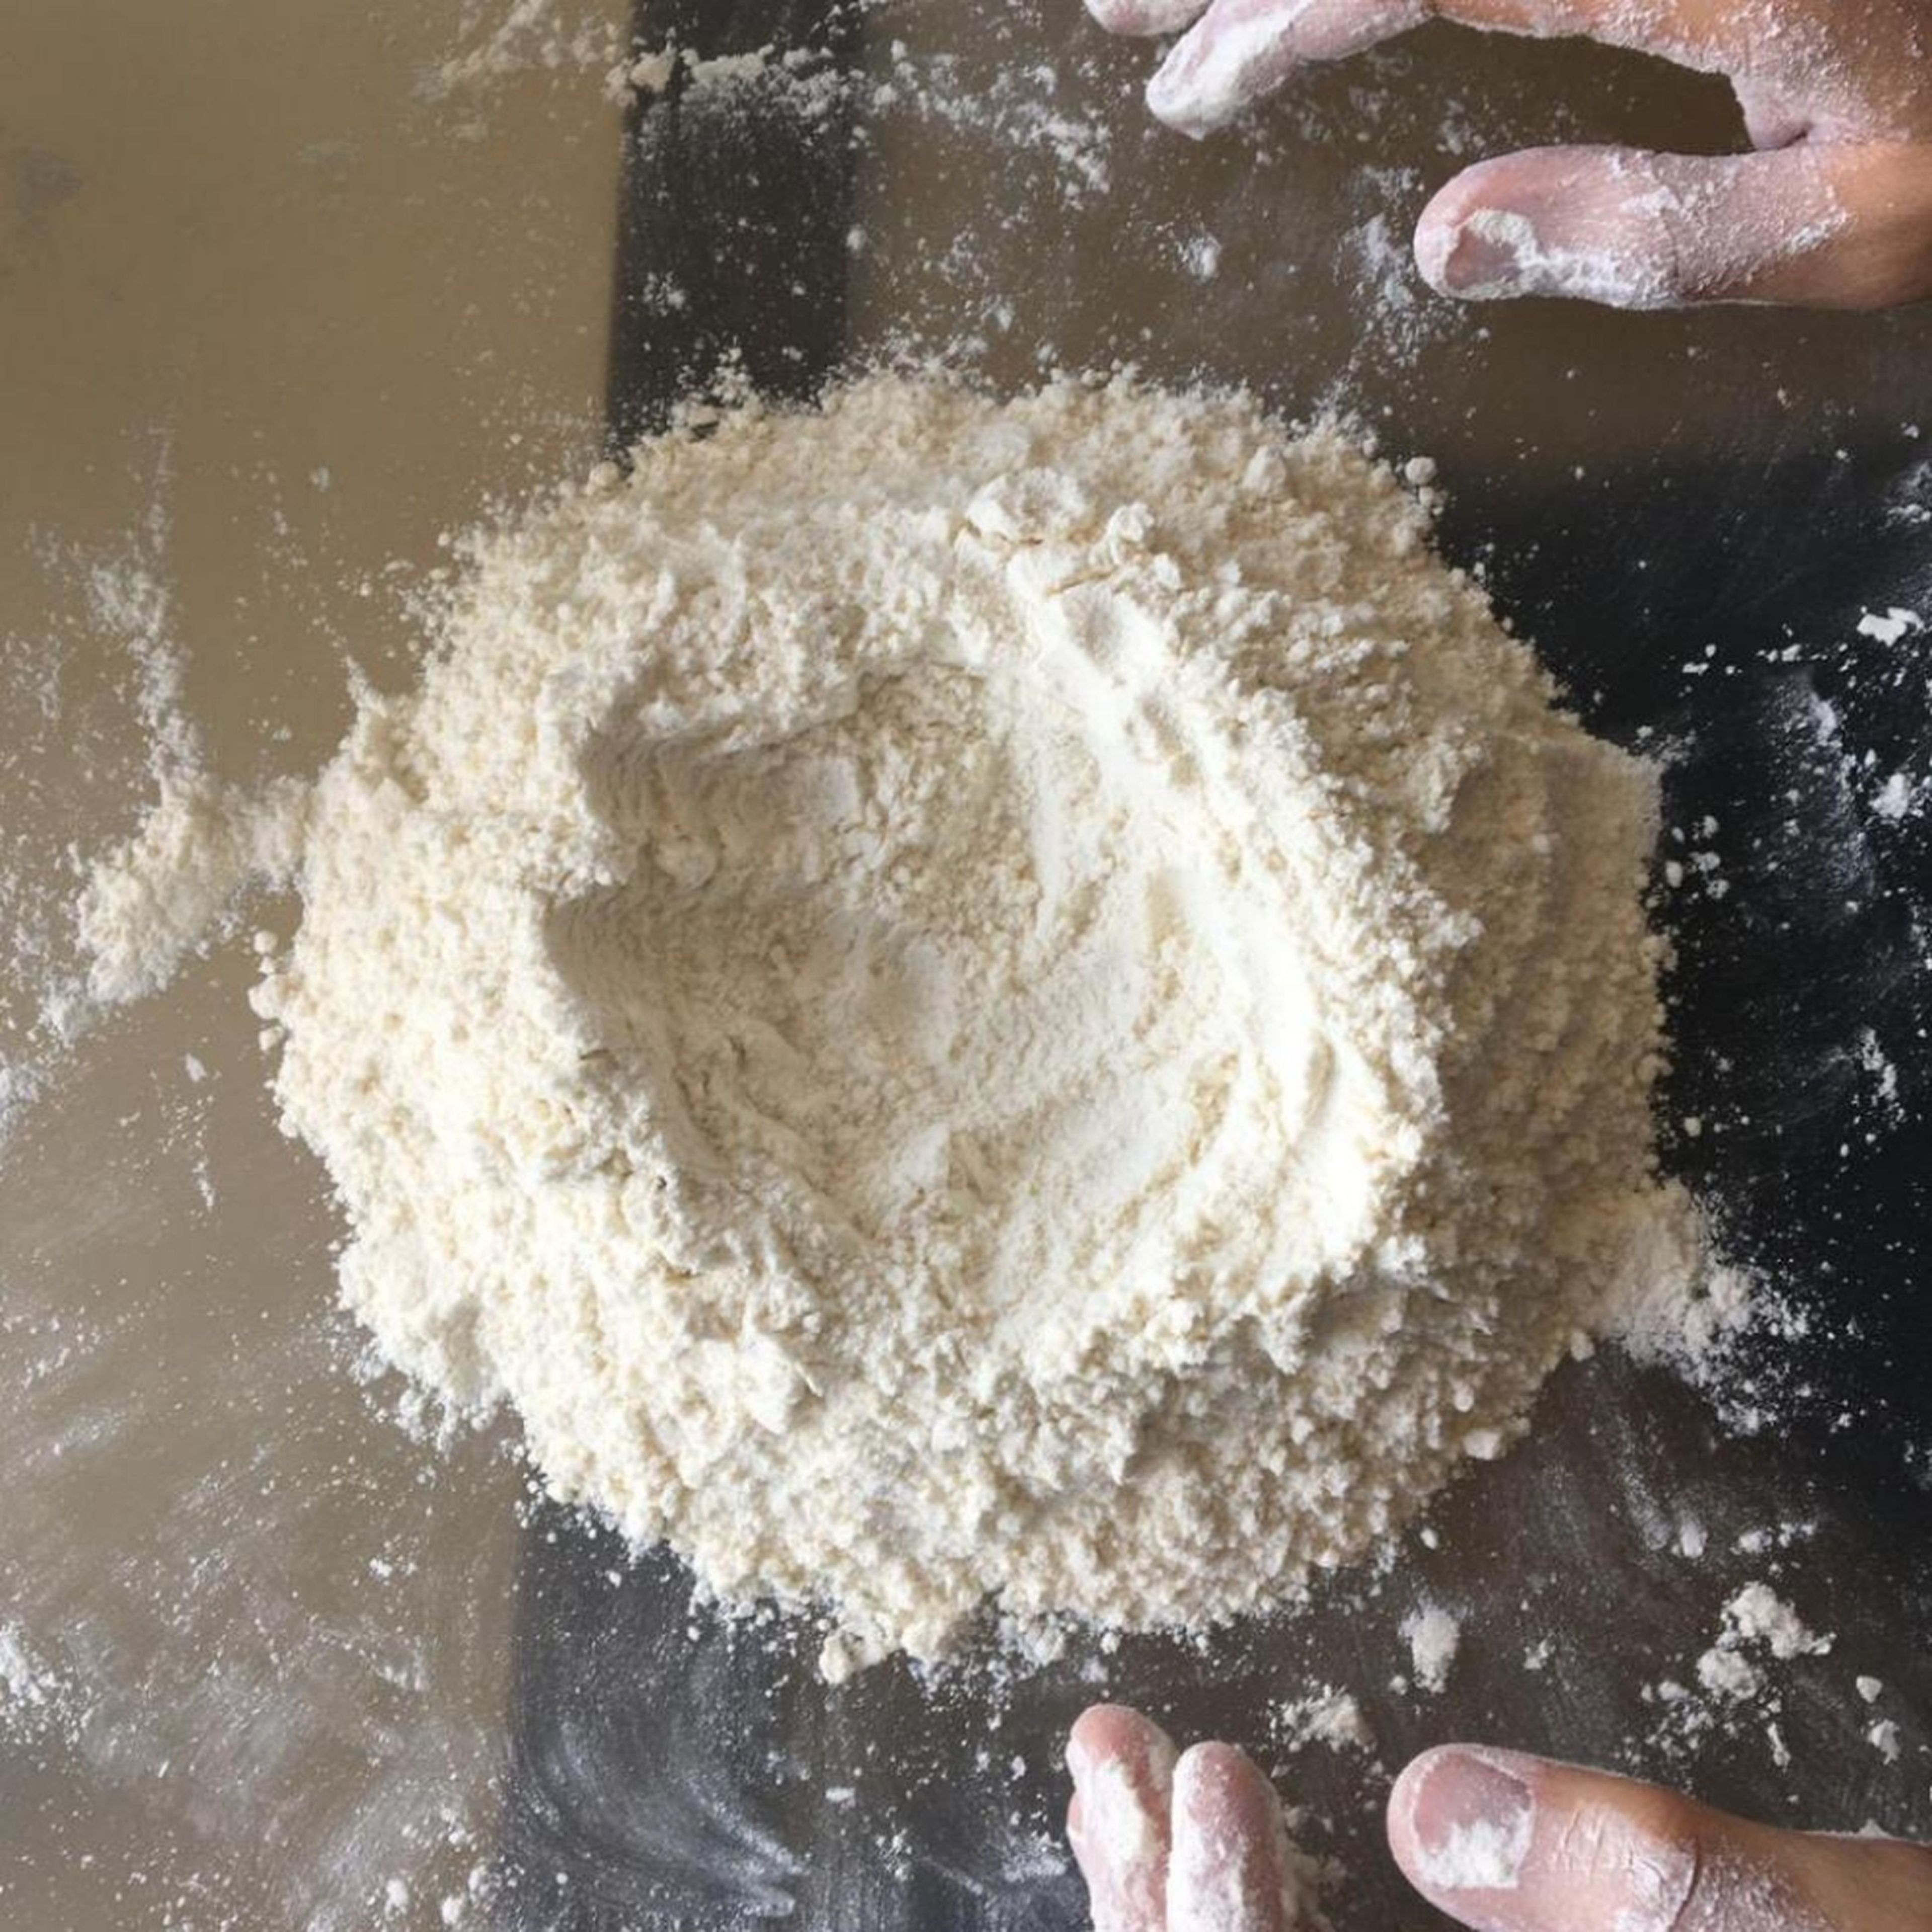 Mix flour and sugar on a flat surface and make a well in the middle.